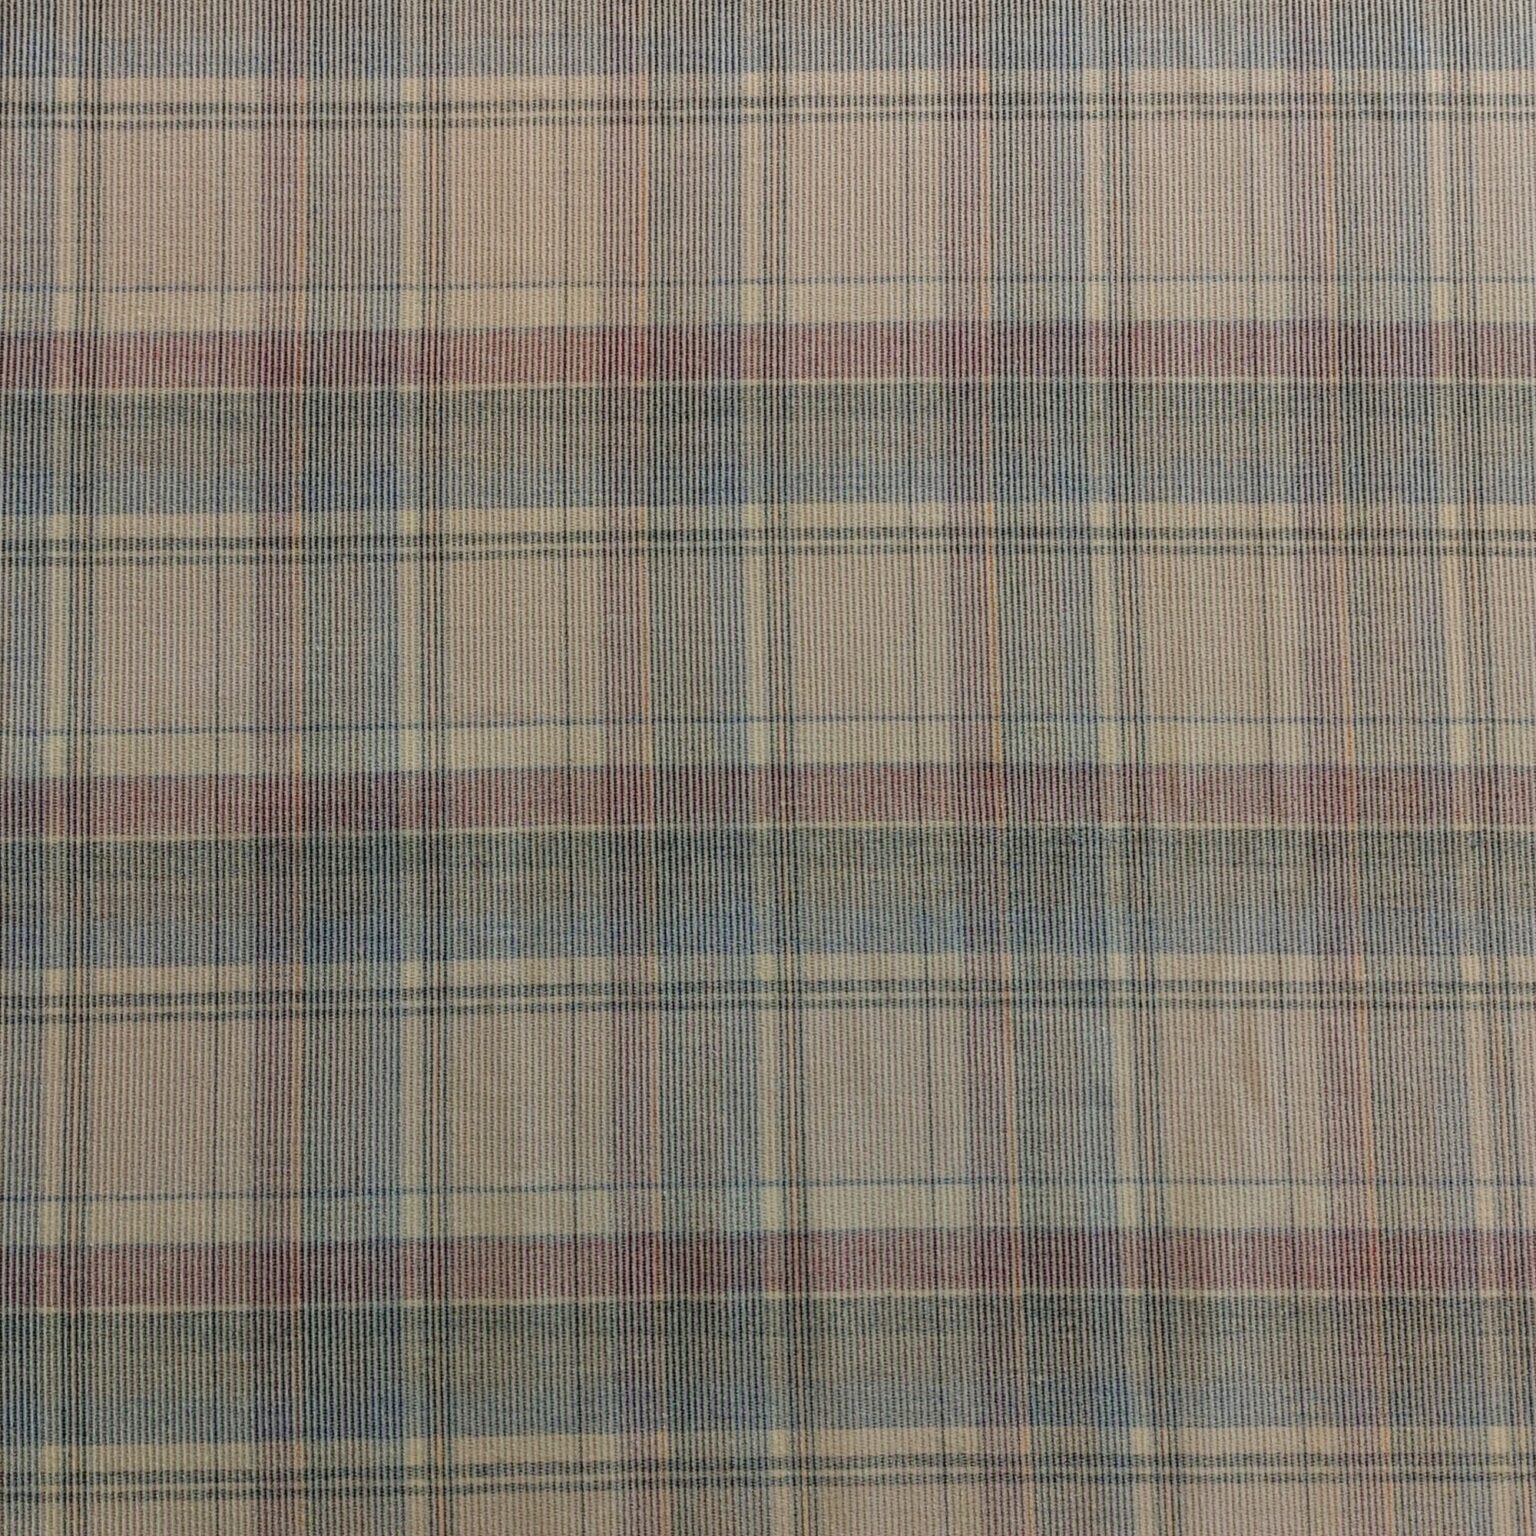 Babycord Yarn Dyed Check Fabric | More Sewing